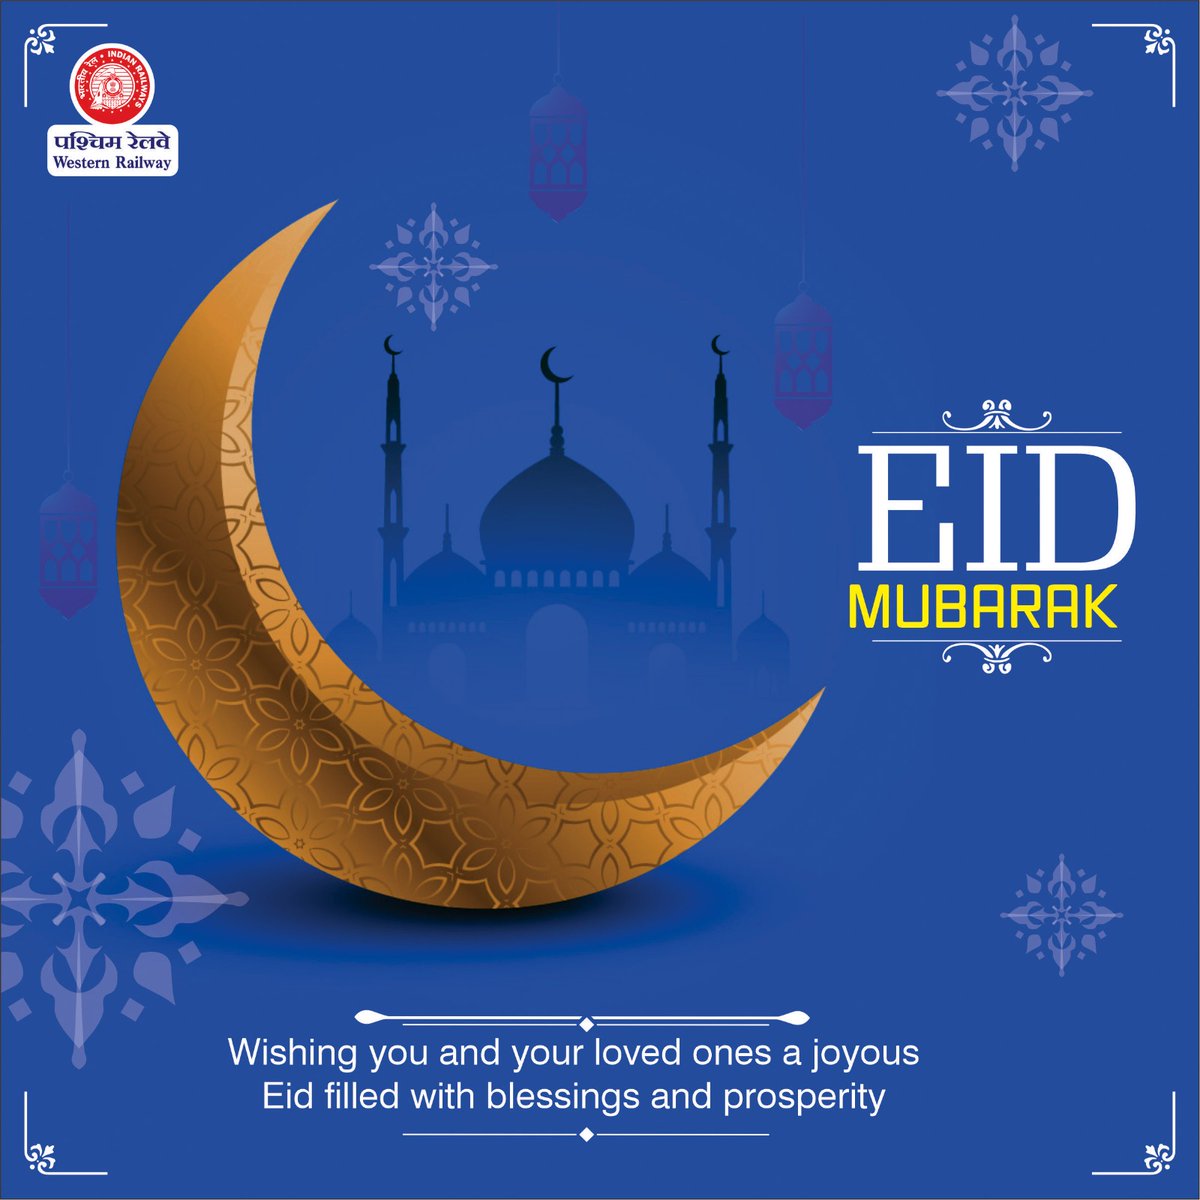 Western Railway extends warm greetings & best wishes on the occasion of Eid. May this festival bring you joy, happiness, peace and prosperity. #EidMubarak #Eidmubarak2024